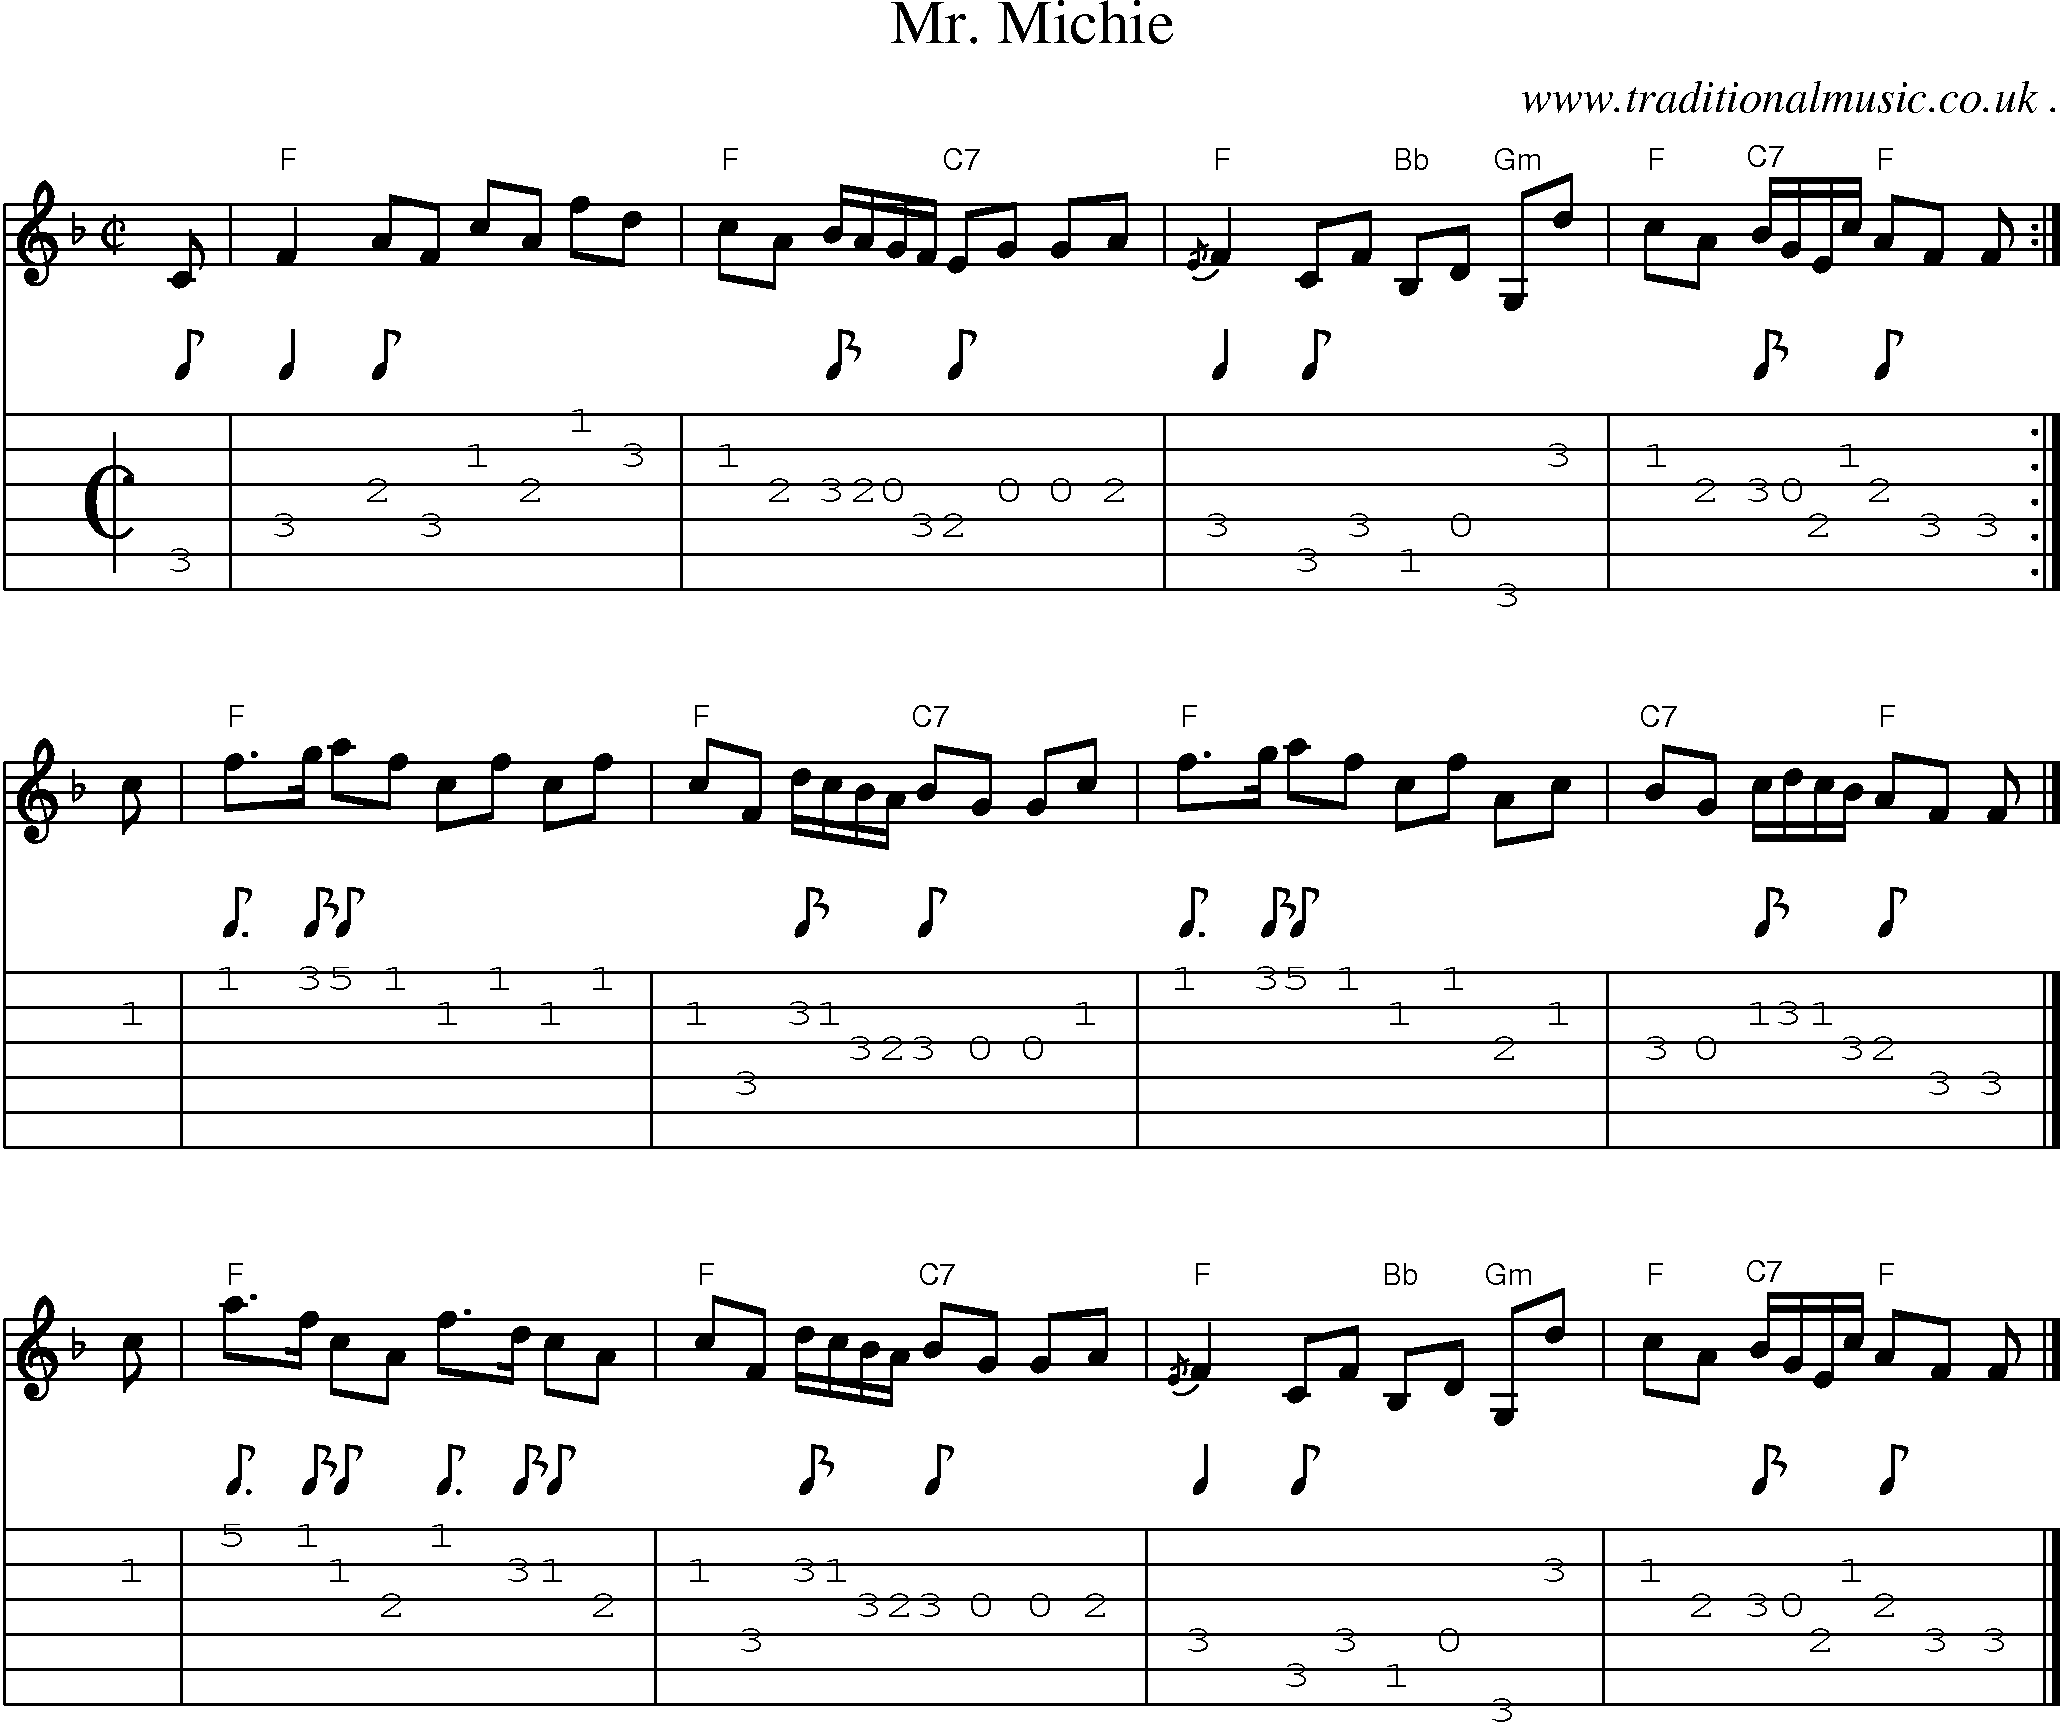 Sheet-music  score, Chords and Guitar Tabs for Mr Michie